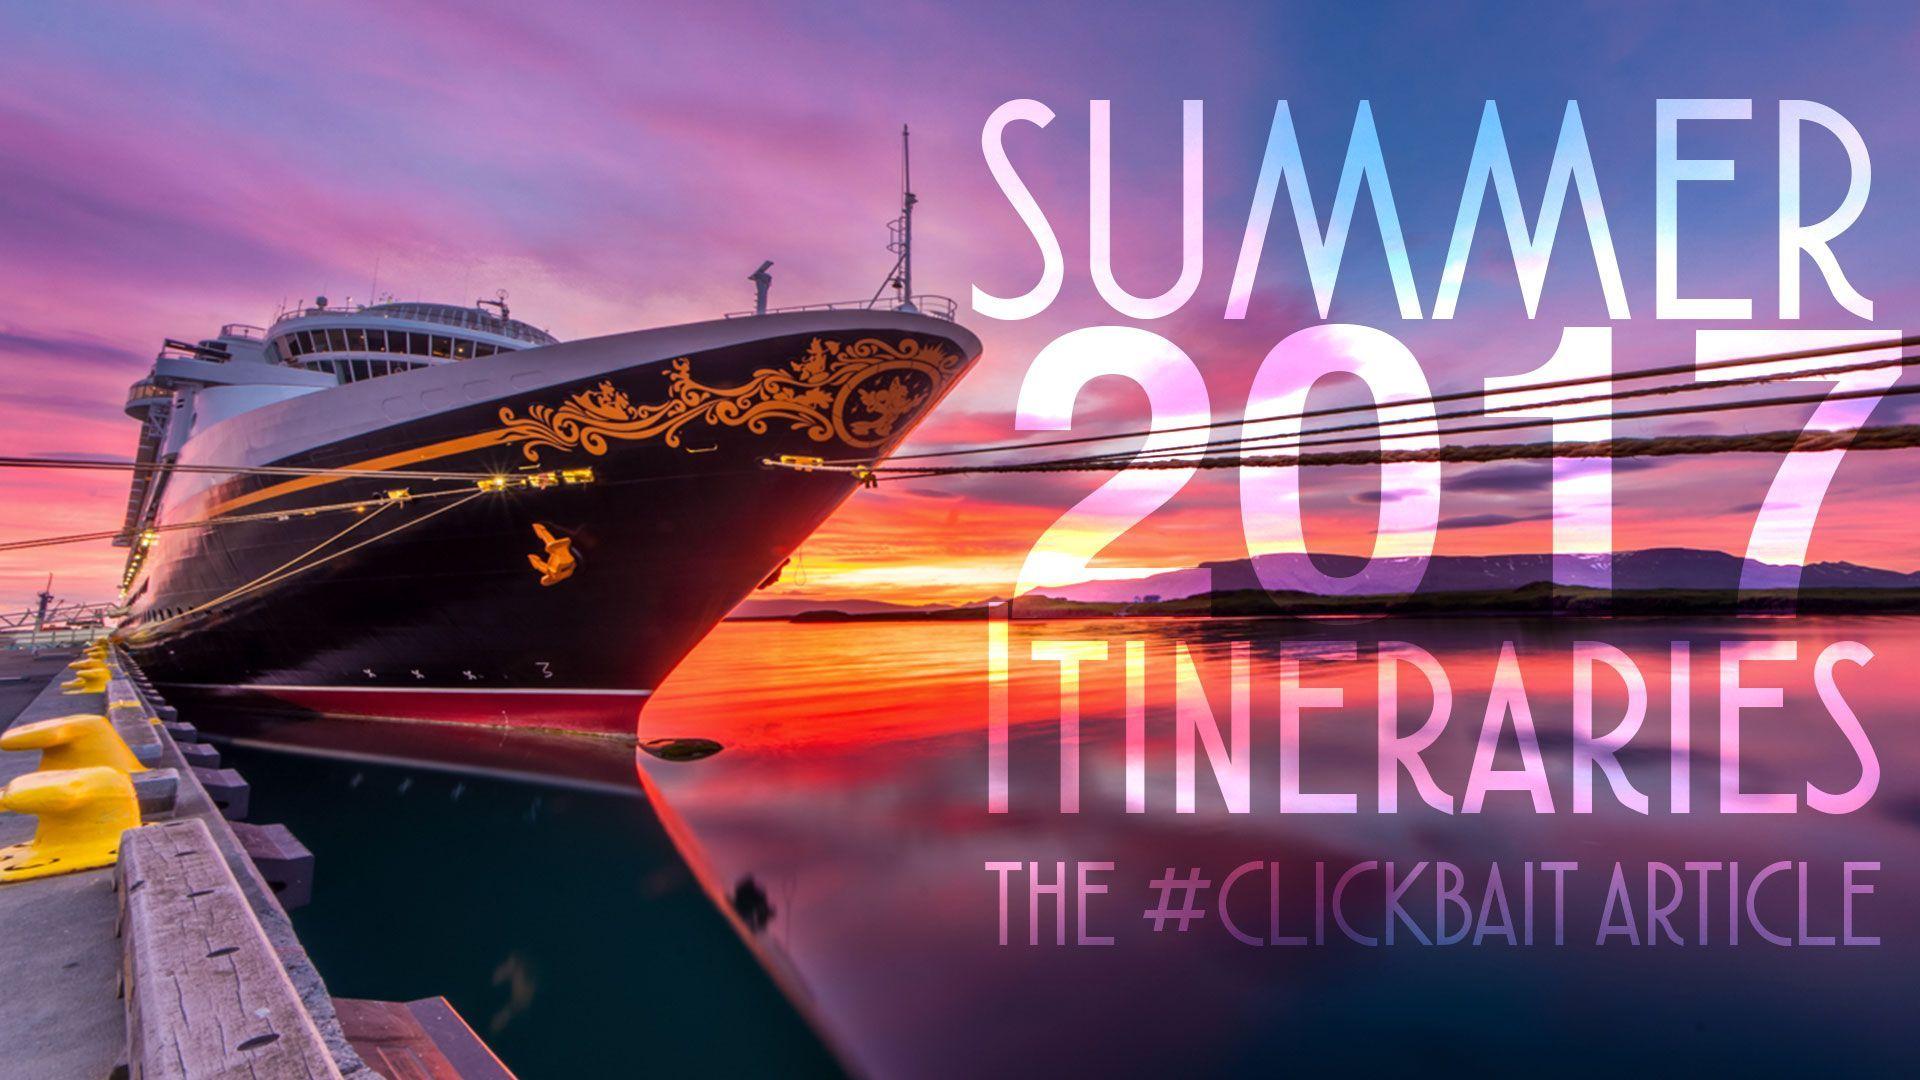 Summer 2017 Itineraries the #Clickbait Article • The Disney Cruise